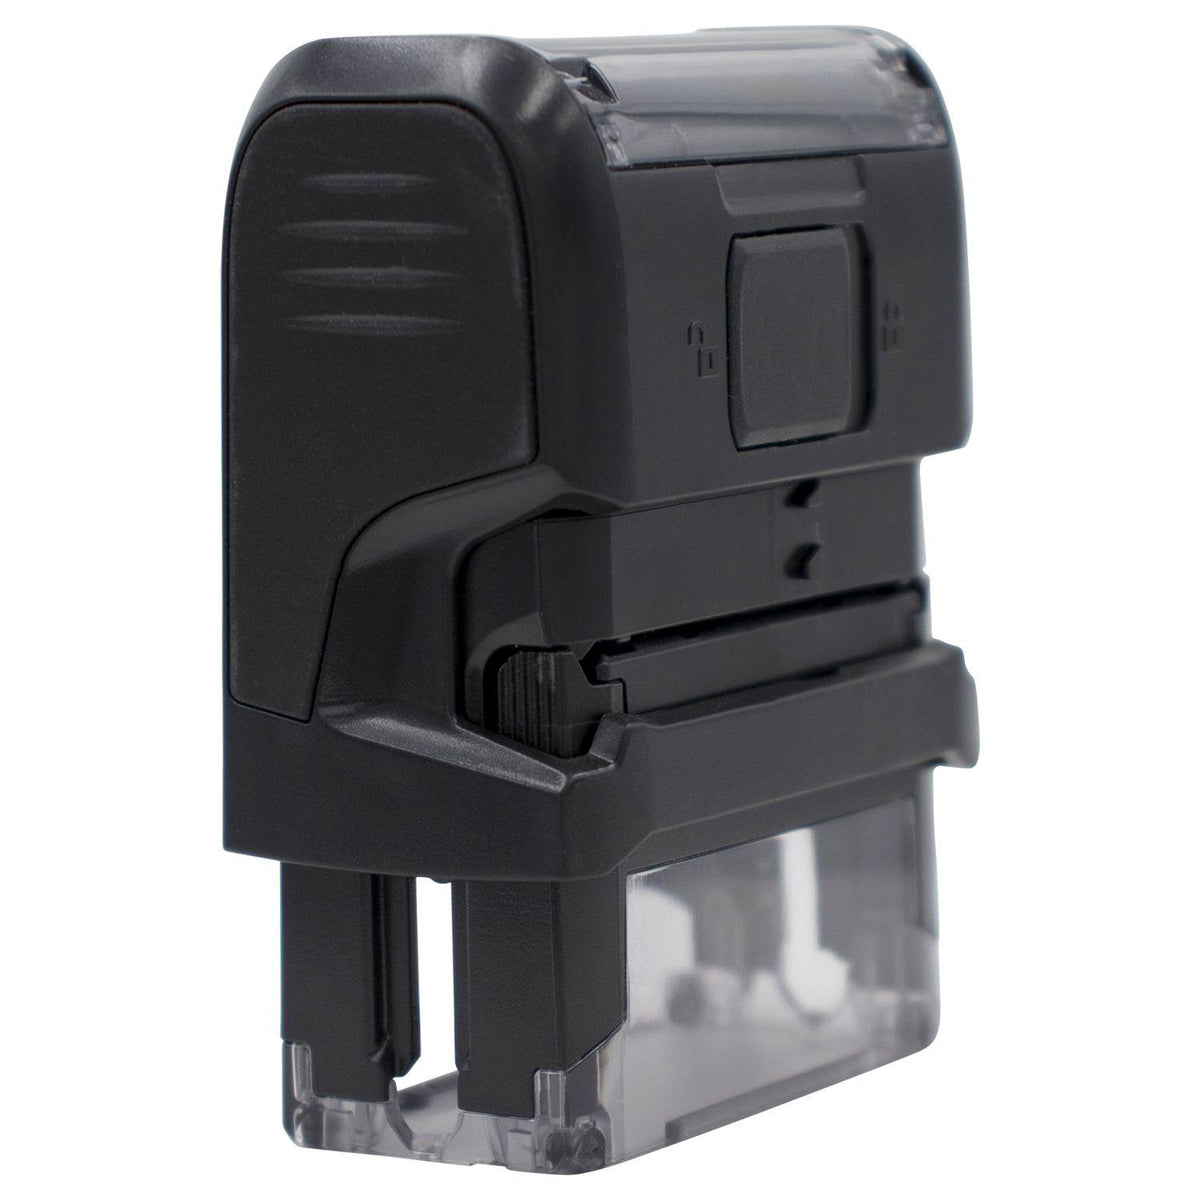 Self Inking Shred Stamp - Engineer Seal Stamps - Brand_Trodat, Impression Size_Small, Stamp Type_Self-Inking Stamp, Type of Use_Office